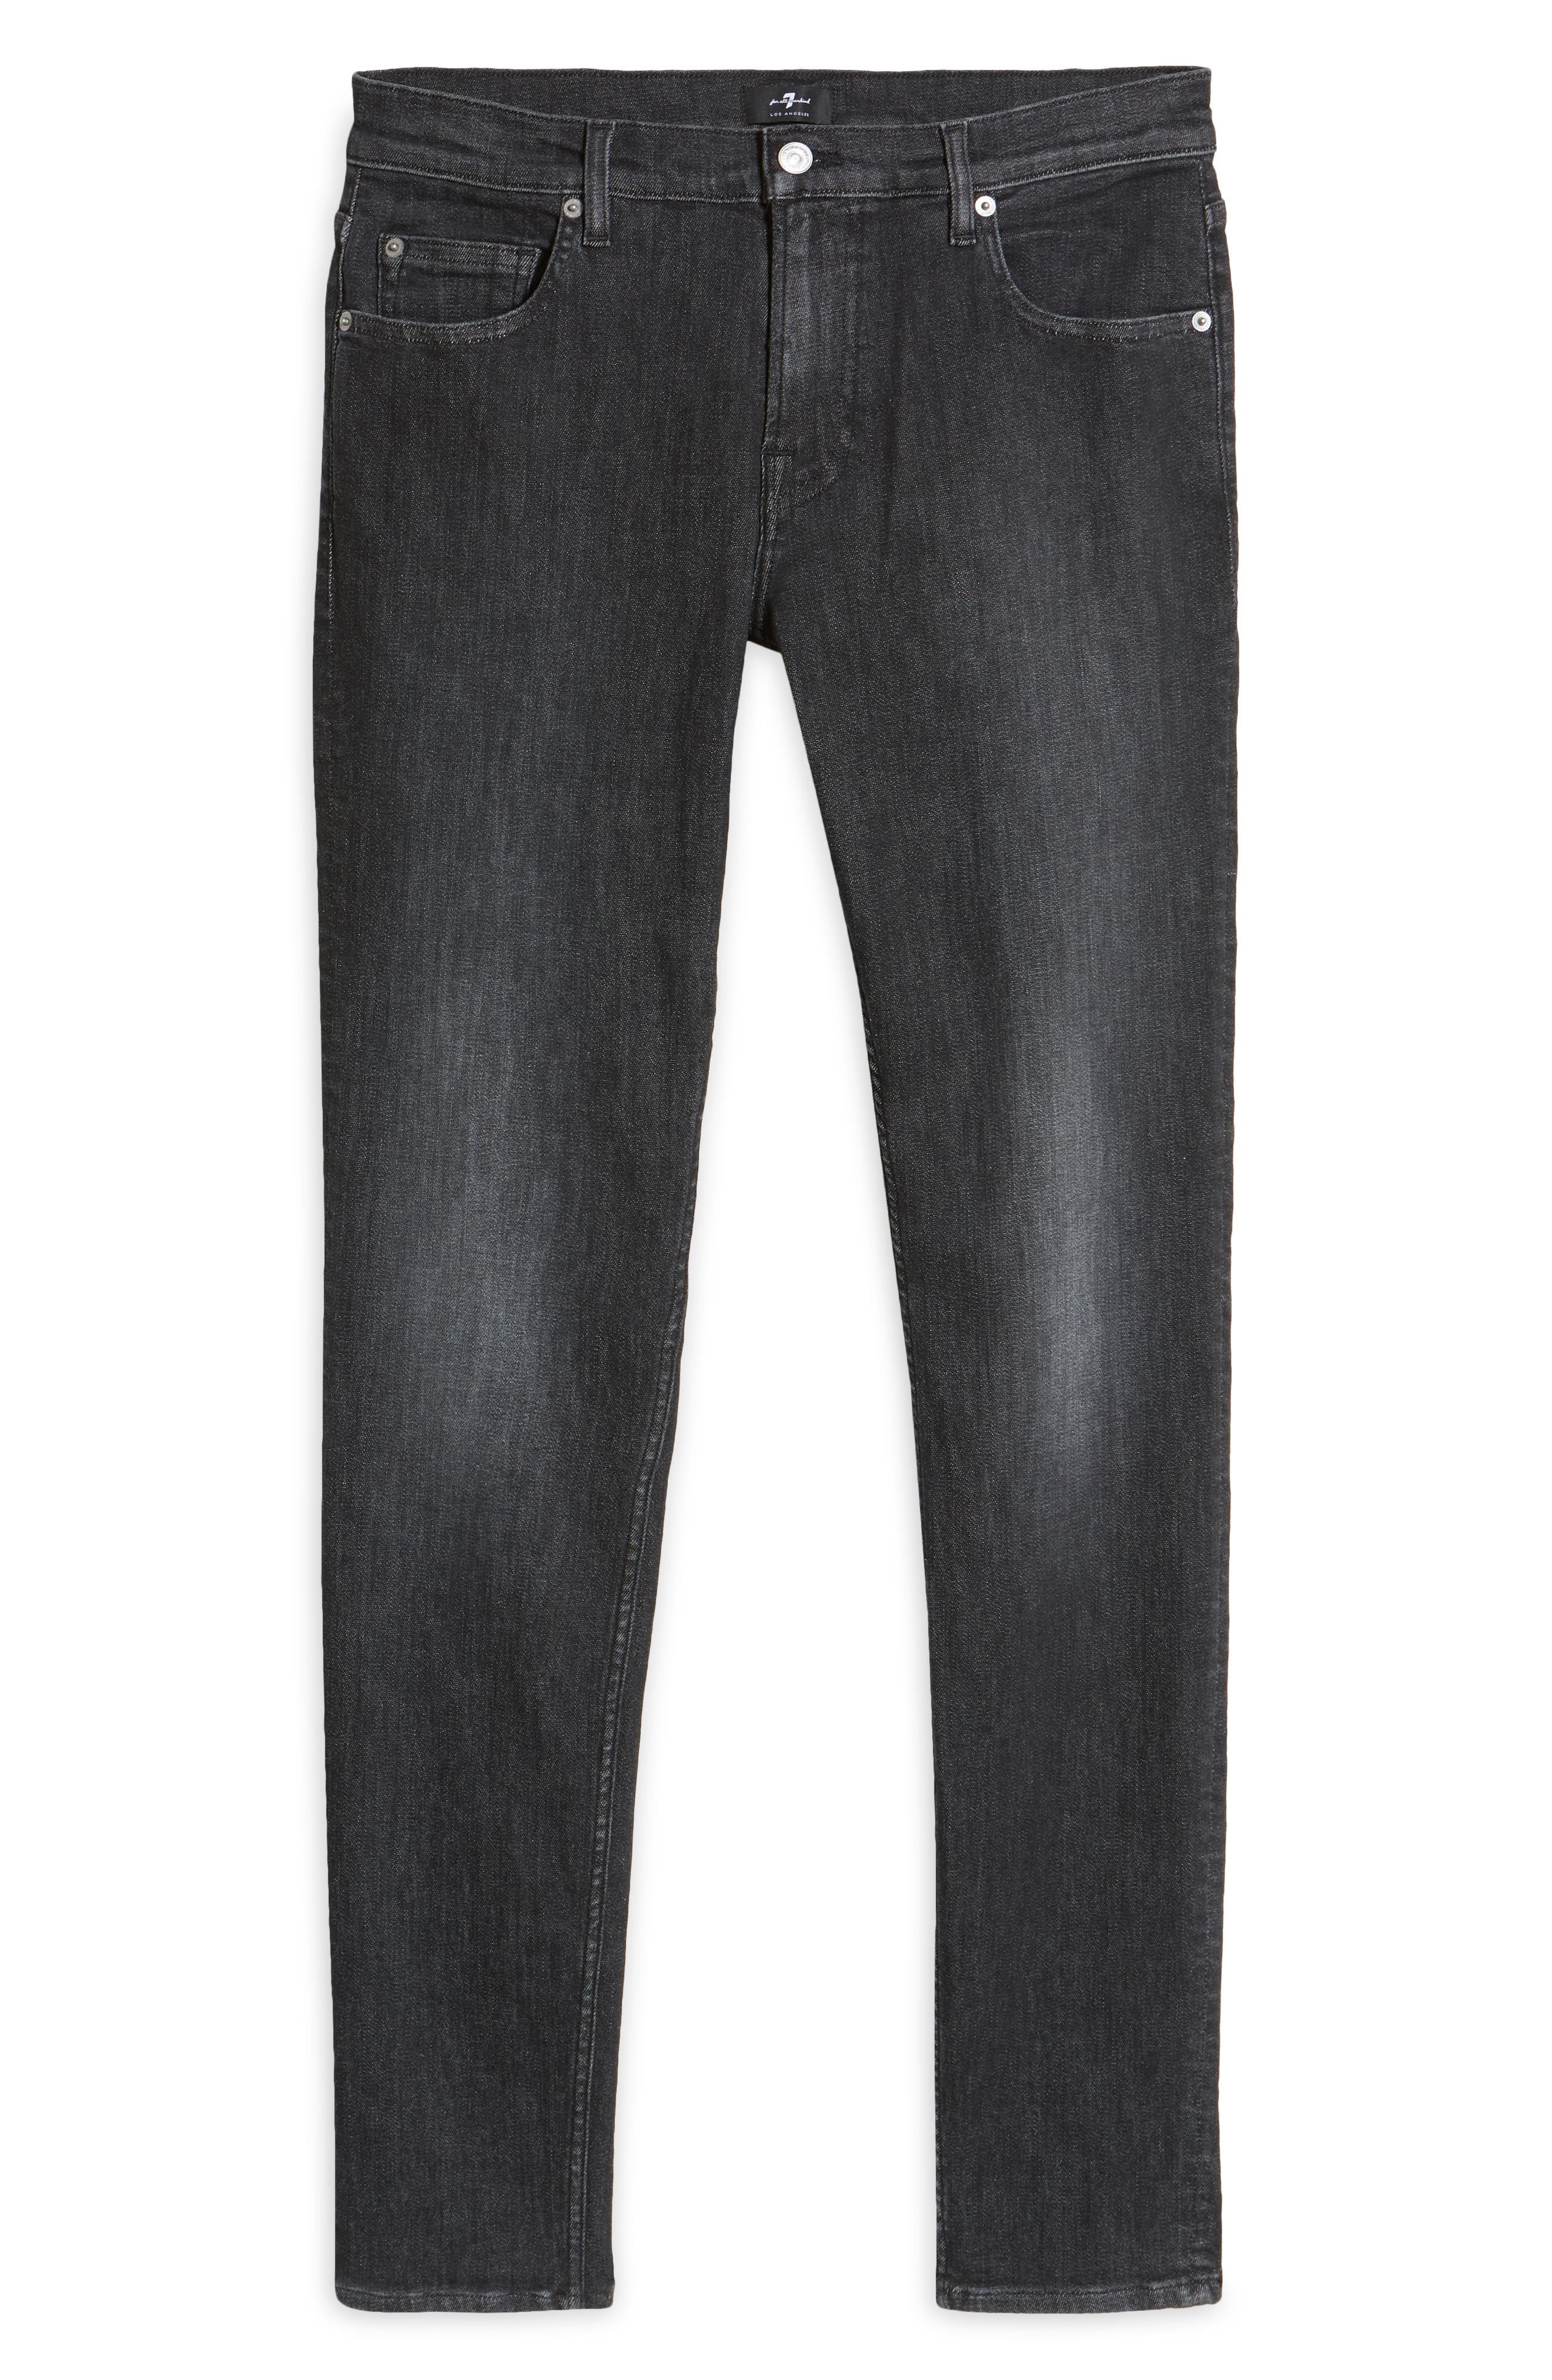 7 For All Mankind The Stacked Skinny Jeans, $99 | Nordstrom | Lookastic